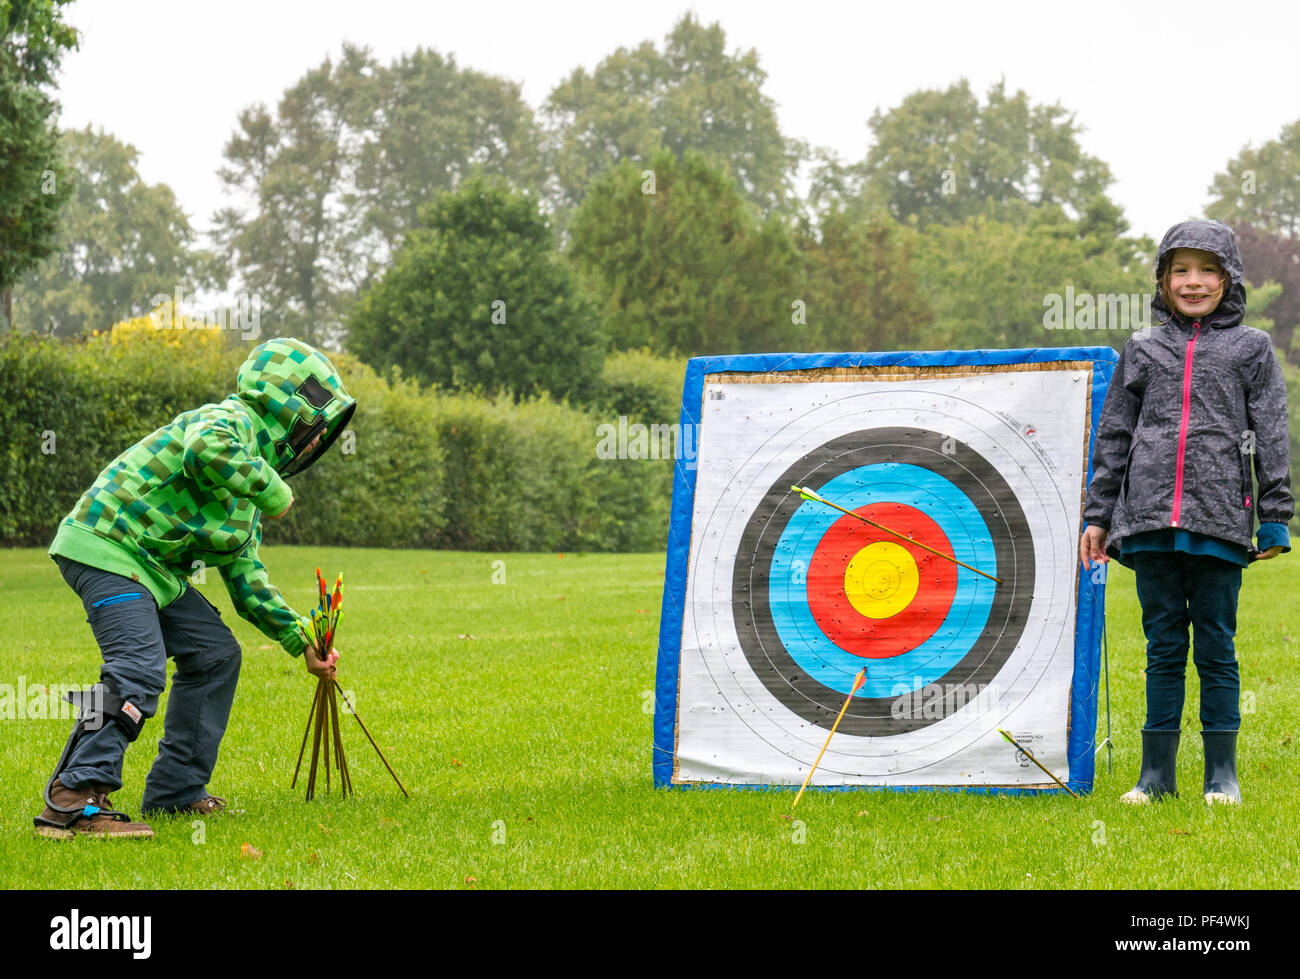 Haddington, UK. 19 August 2018.  The Royal Company of Archers, a ceremonial unit known as the Queen’s Bodyguard For Scotland stages a clout archery shoot as part of Haddington 700 events taking place during 2018 to celebrate the granting of a charter by Robert the Bruce to the town in 1318, confirming Haddington's right to hold a market and collect customs. Children also had a chance to try archery. A young girl points to her arrow which hit the target, and a young disabled boy with a leg brace for hemiplegia collects the arrows Stock Photo